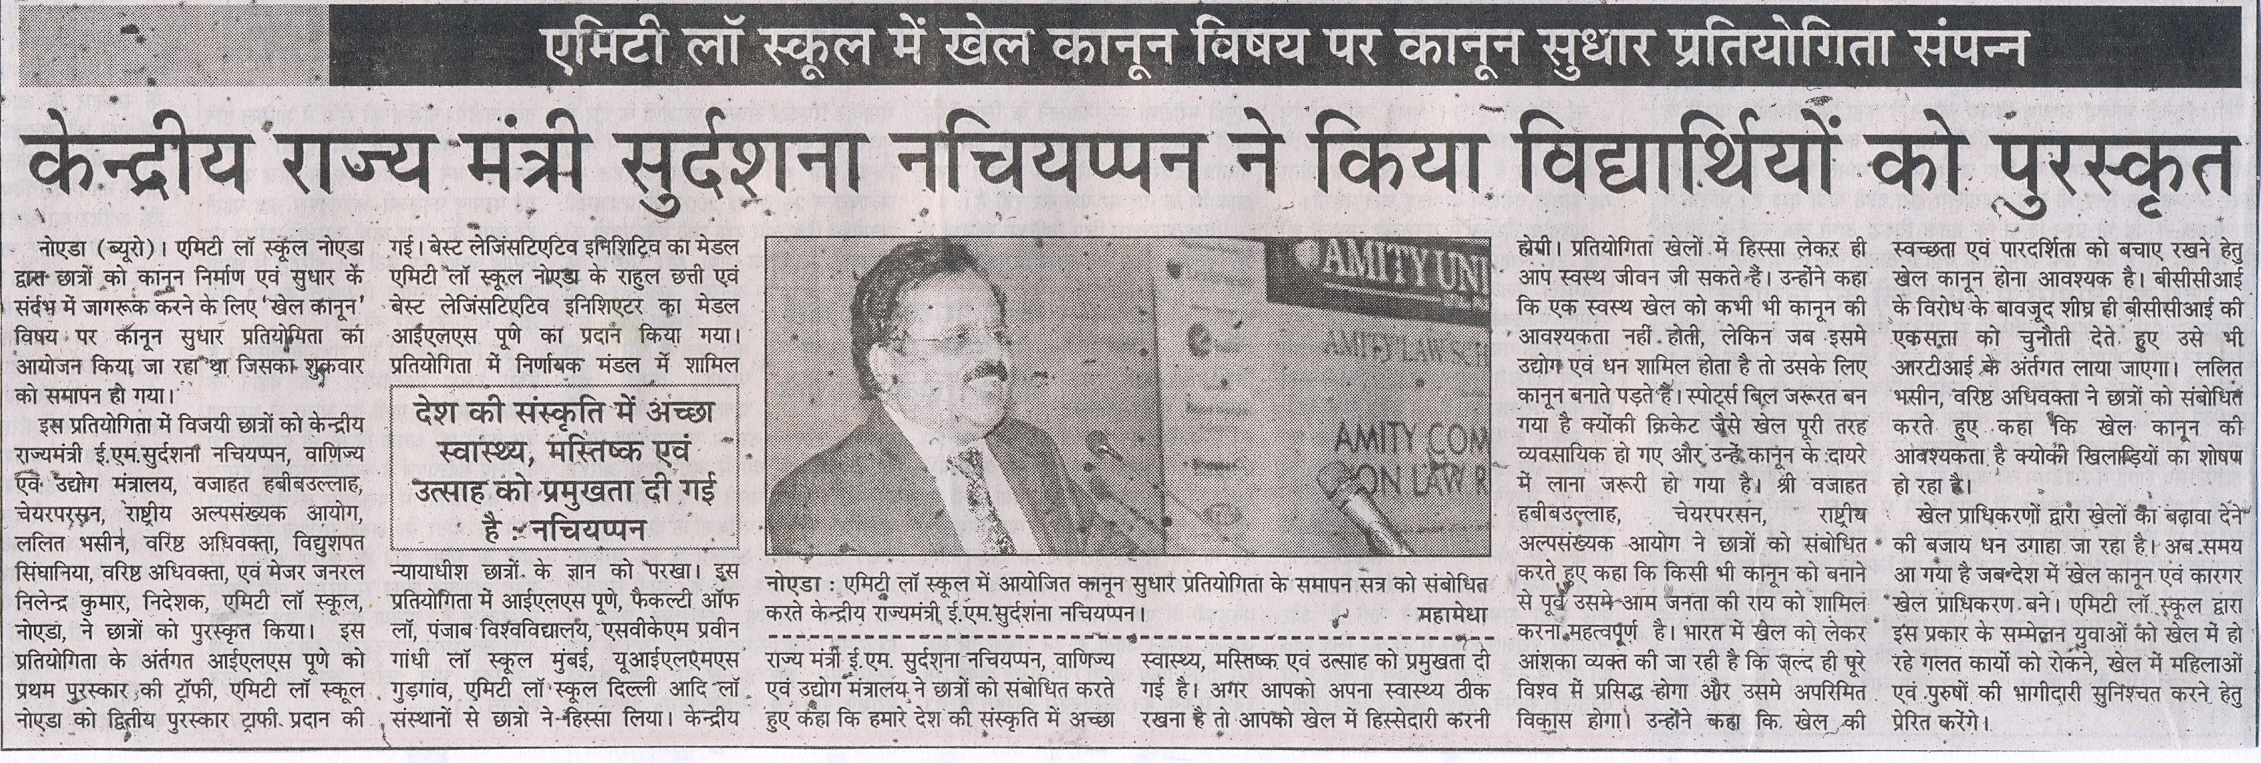 Three day Amity Competition on Law Reforms concluded at Amity Law School, Noida